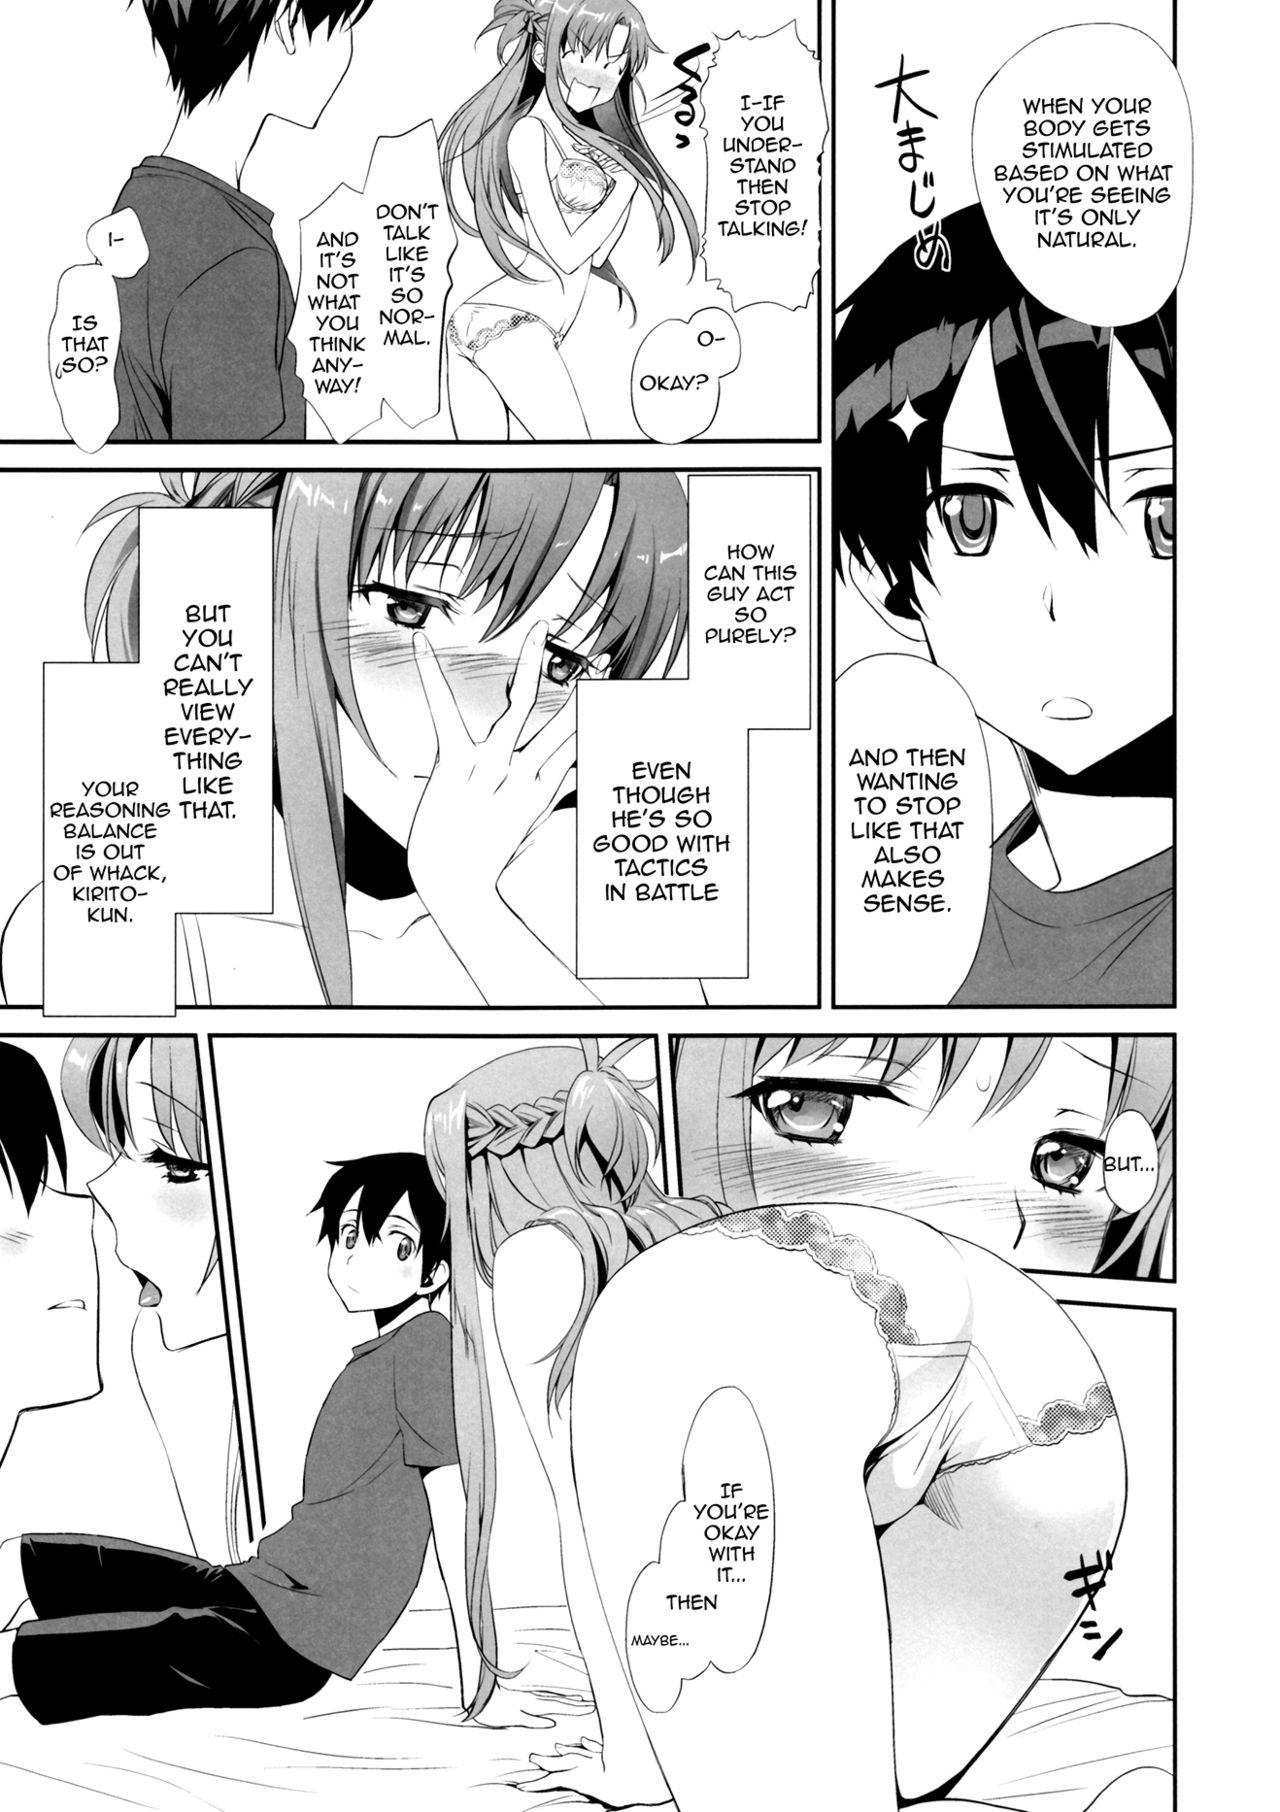 Sucking Dicks Sunny-side up? - Sword art online Best Blowjobs - Page 10